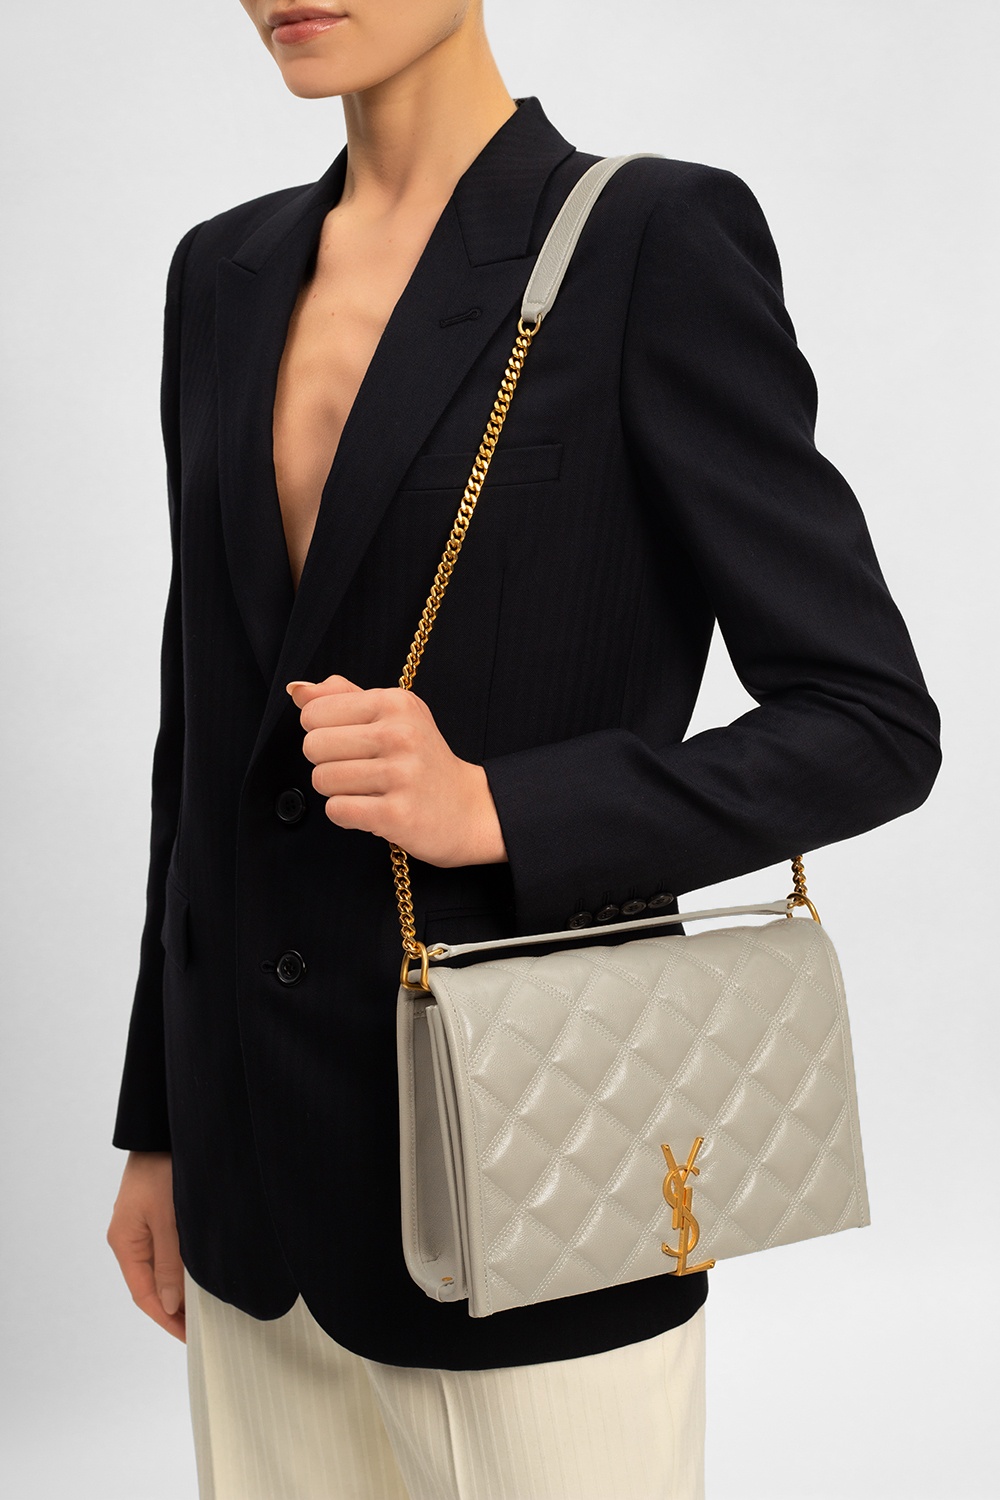 Yves Saint Laurent Becky Quilted Leather Shoulder Chain Bag